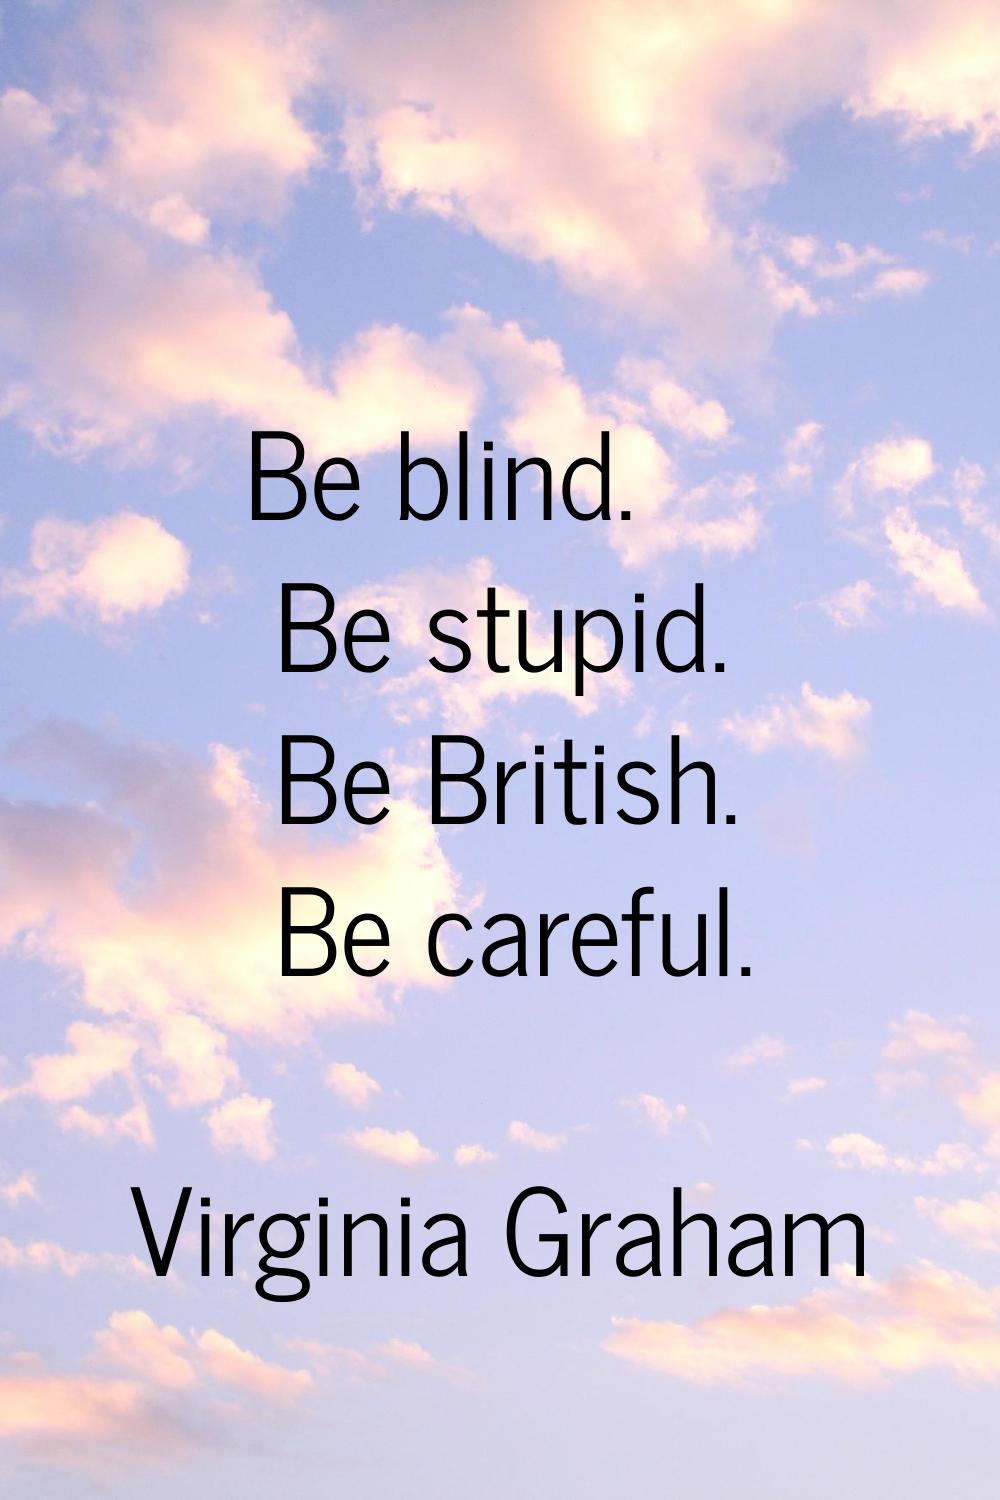 Be blind. Be stupid. Be British. Be careful.